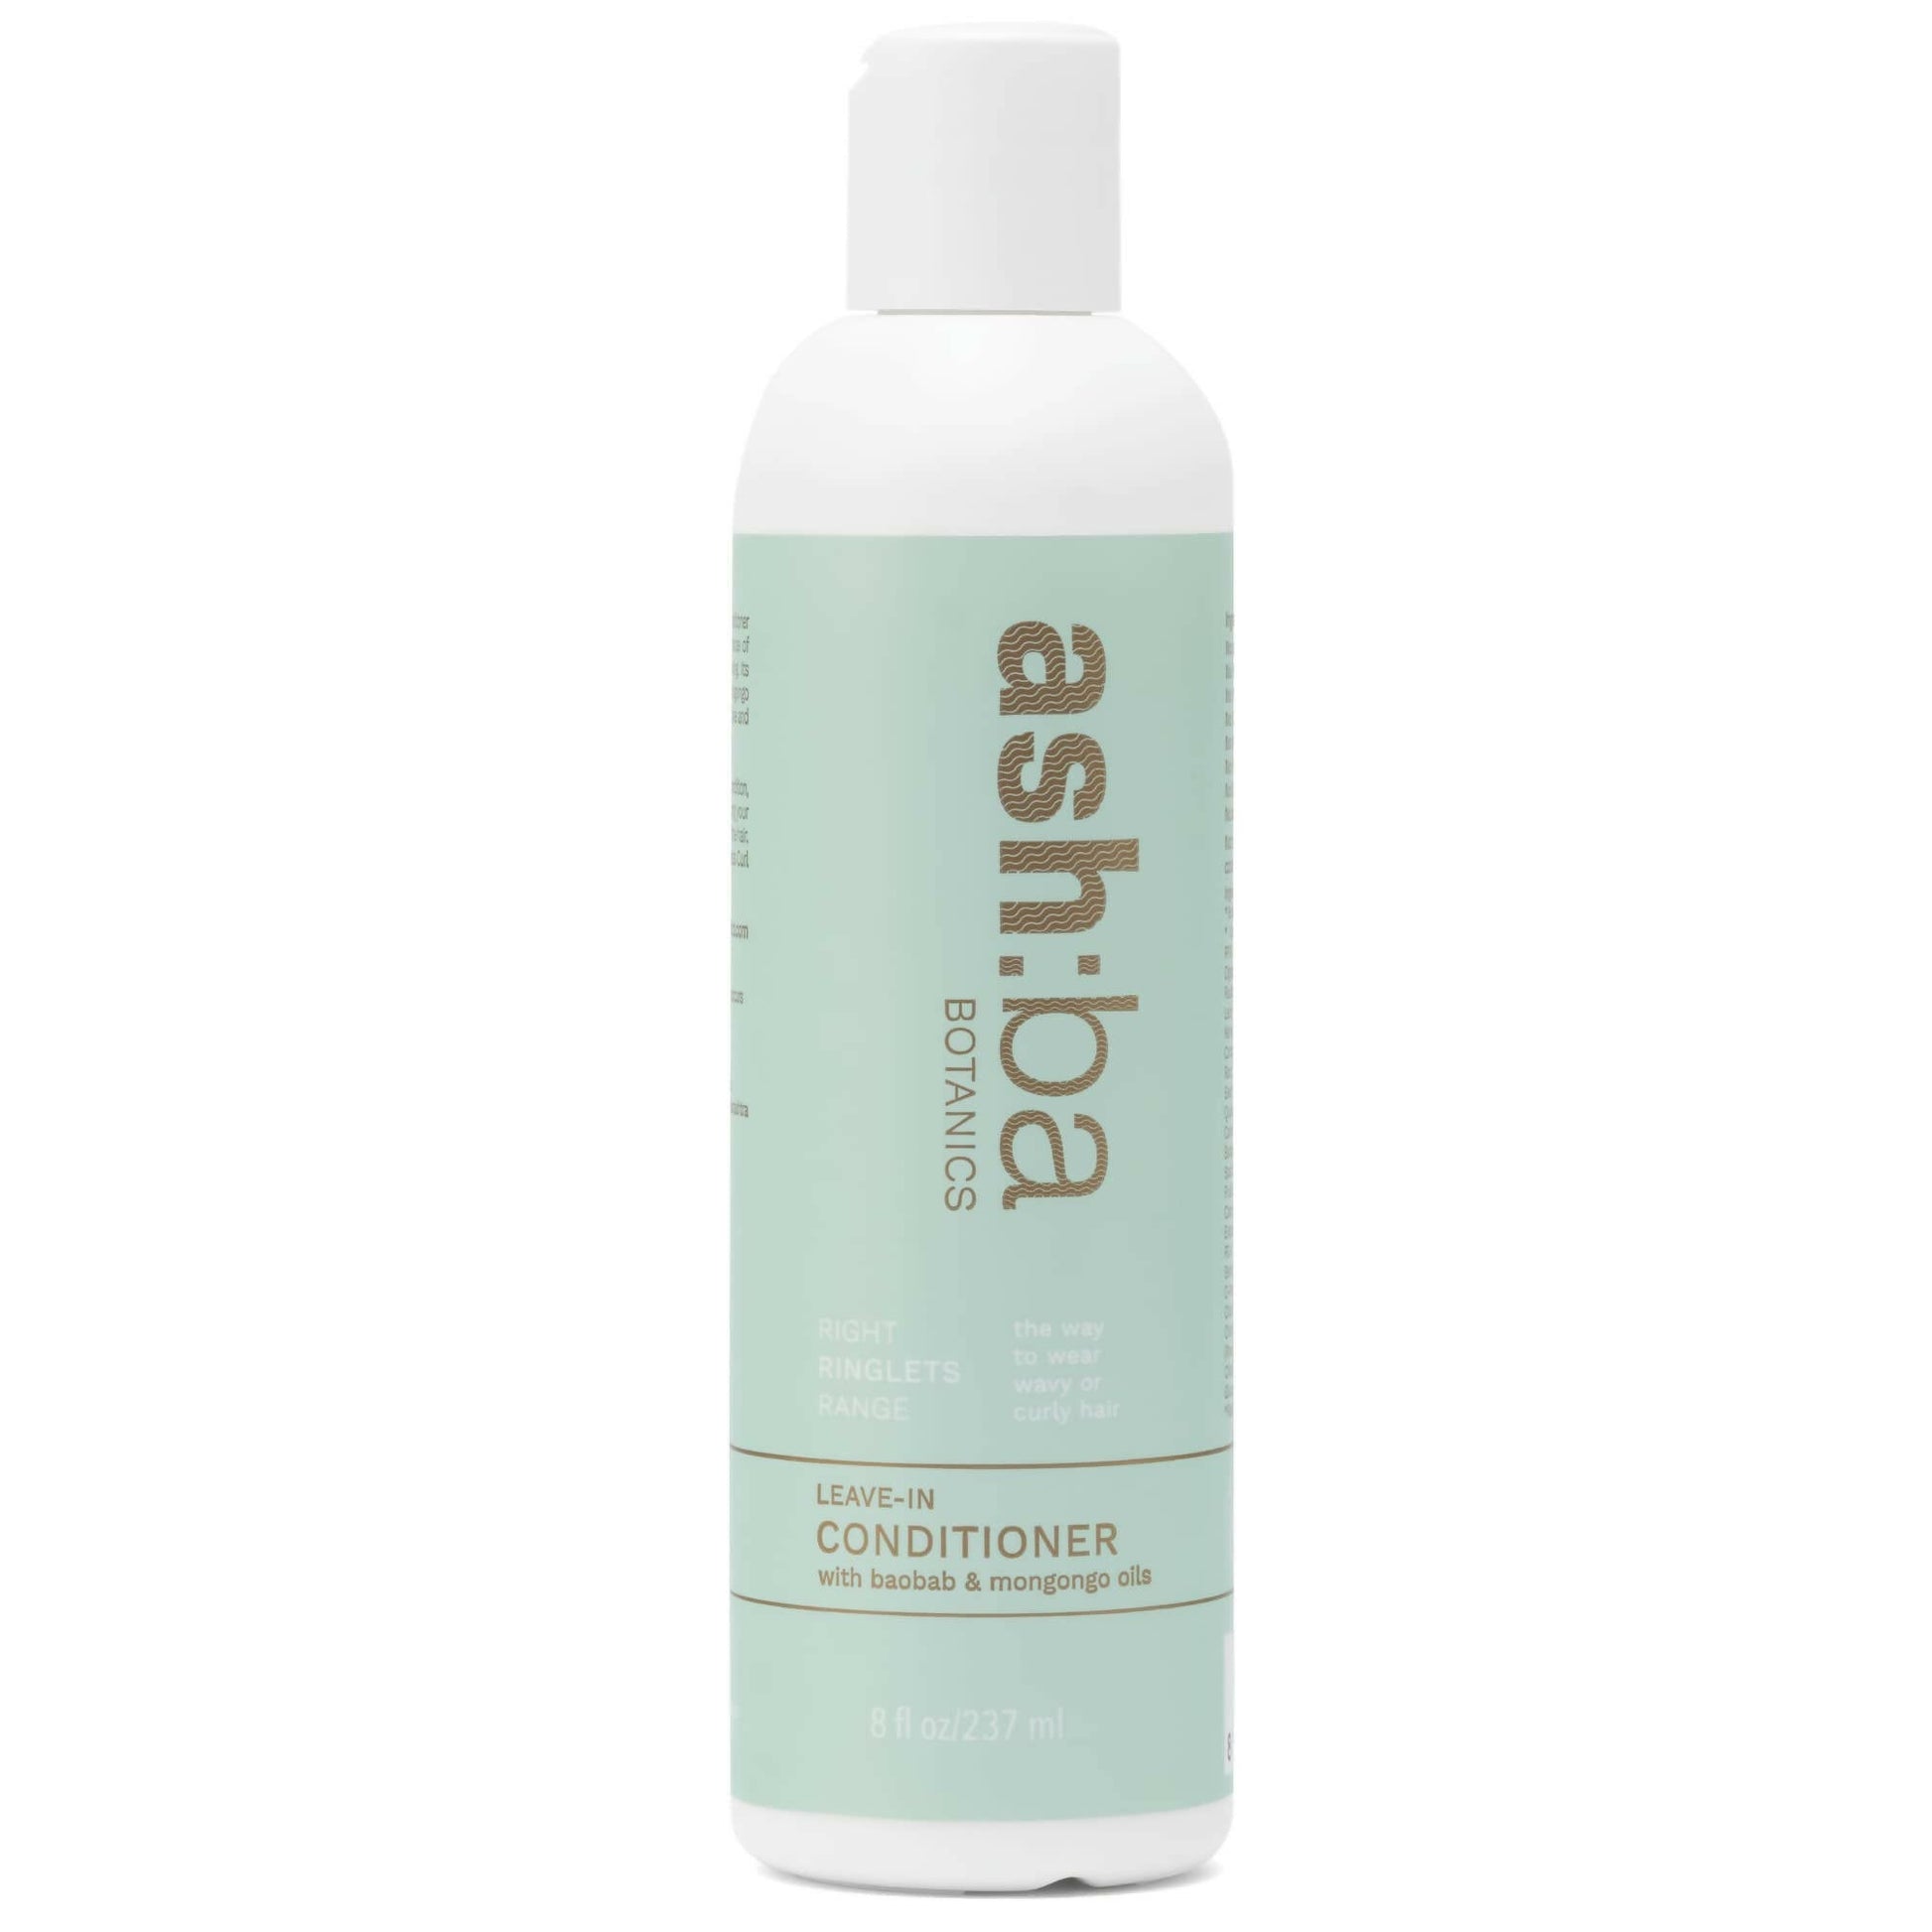 Ashba Botanics Leave-in Conditioner for Curly & Wavy Hair - Buy in USA AUSTRALIA CANADA